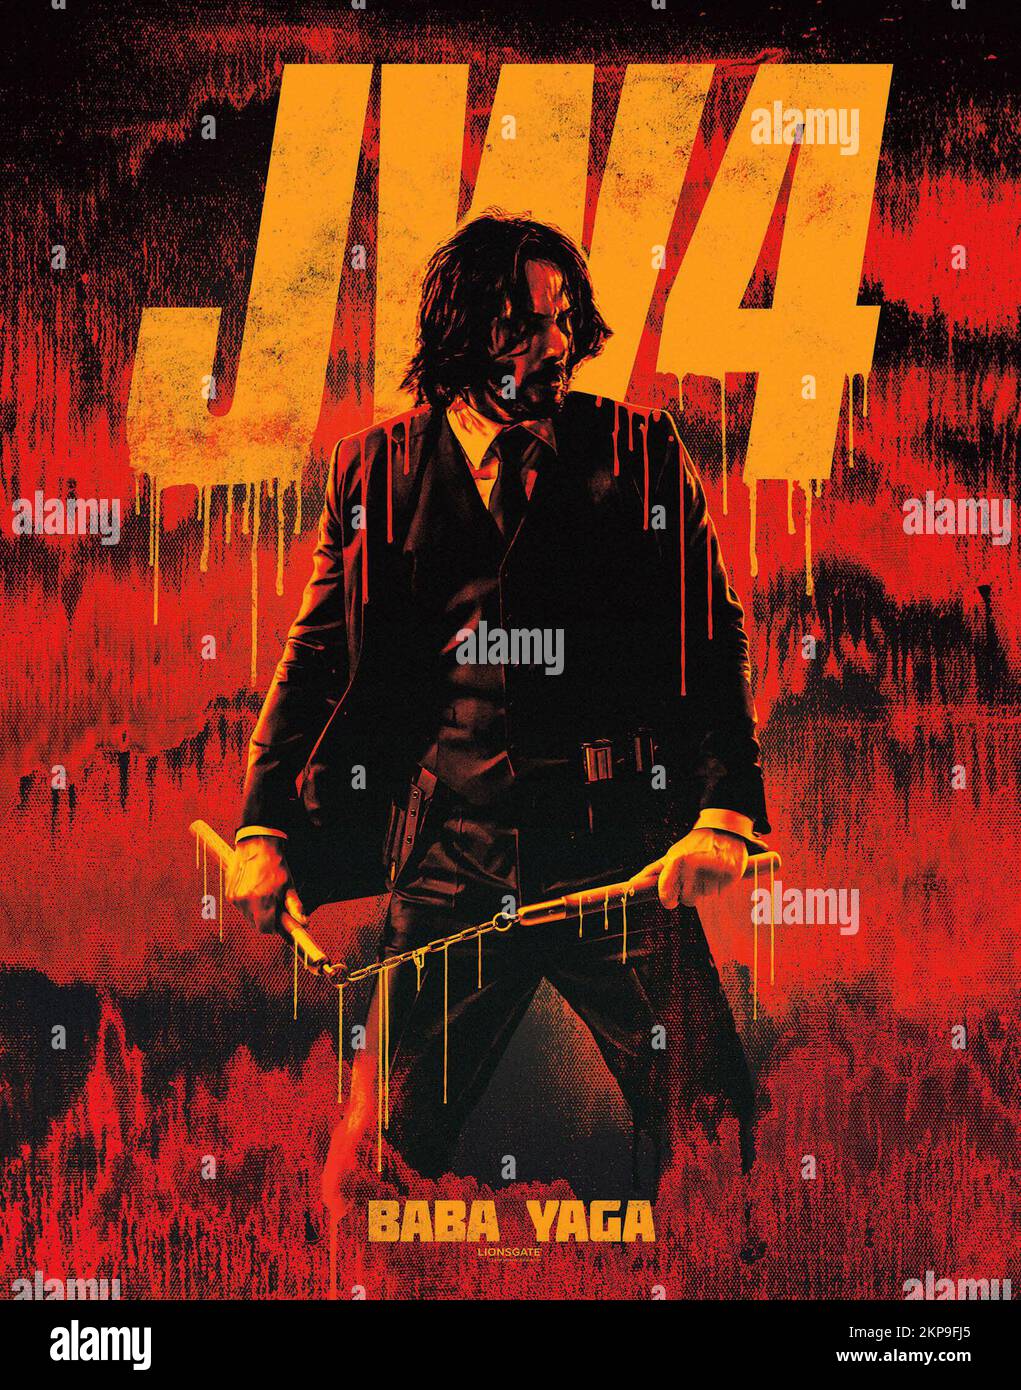 John Wick 4 Movie Poster 2023 - 11x17 Inches, Keanu Reeves